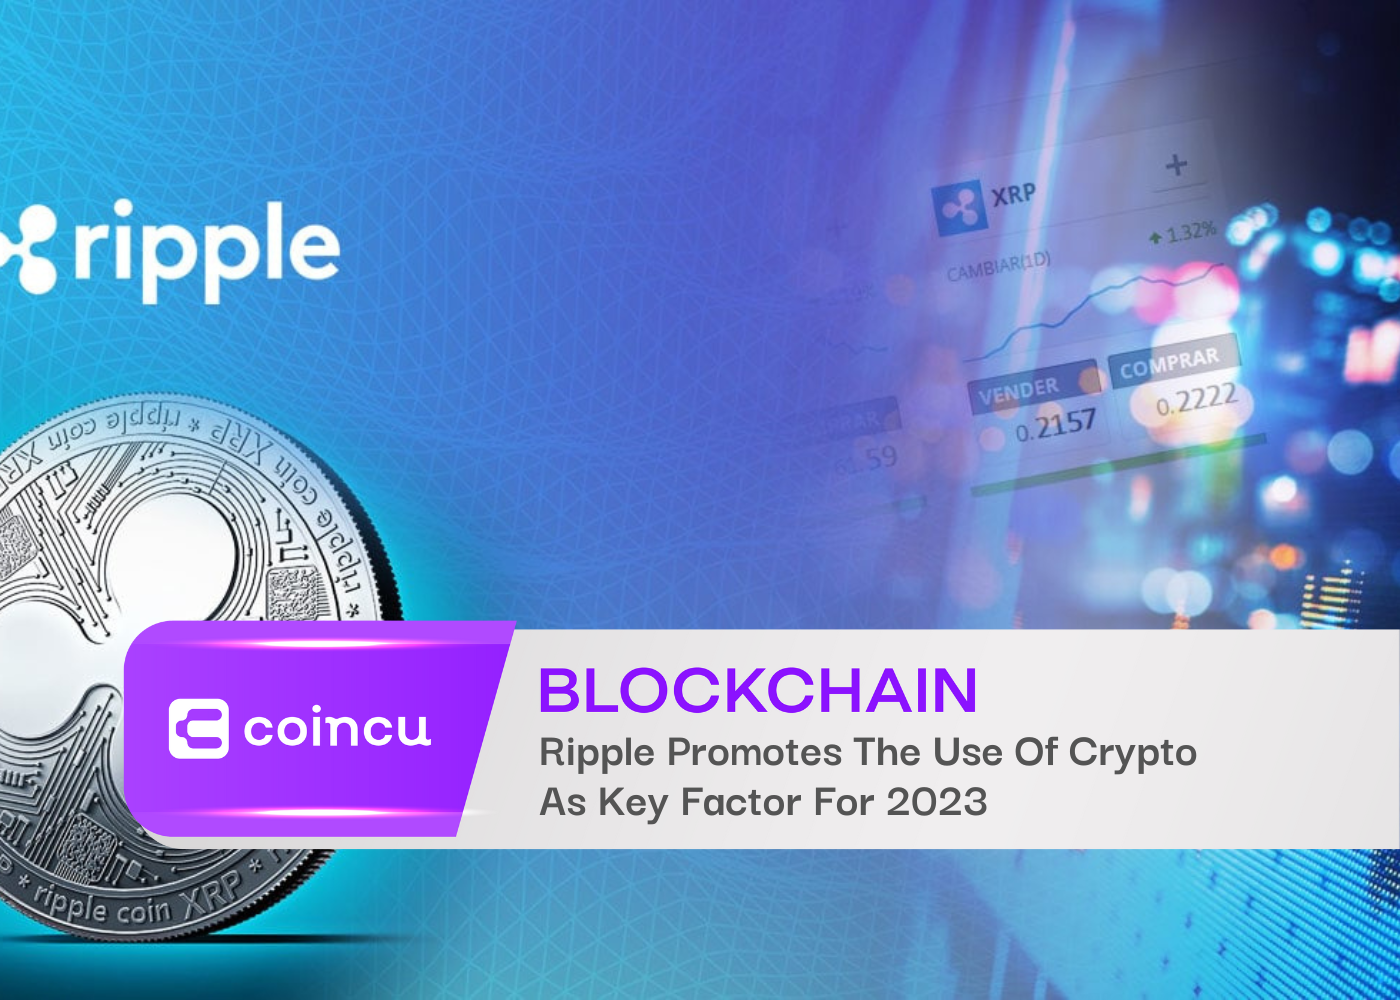 Ripple Promotes The Use Of Crypto